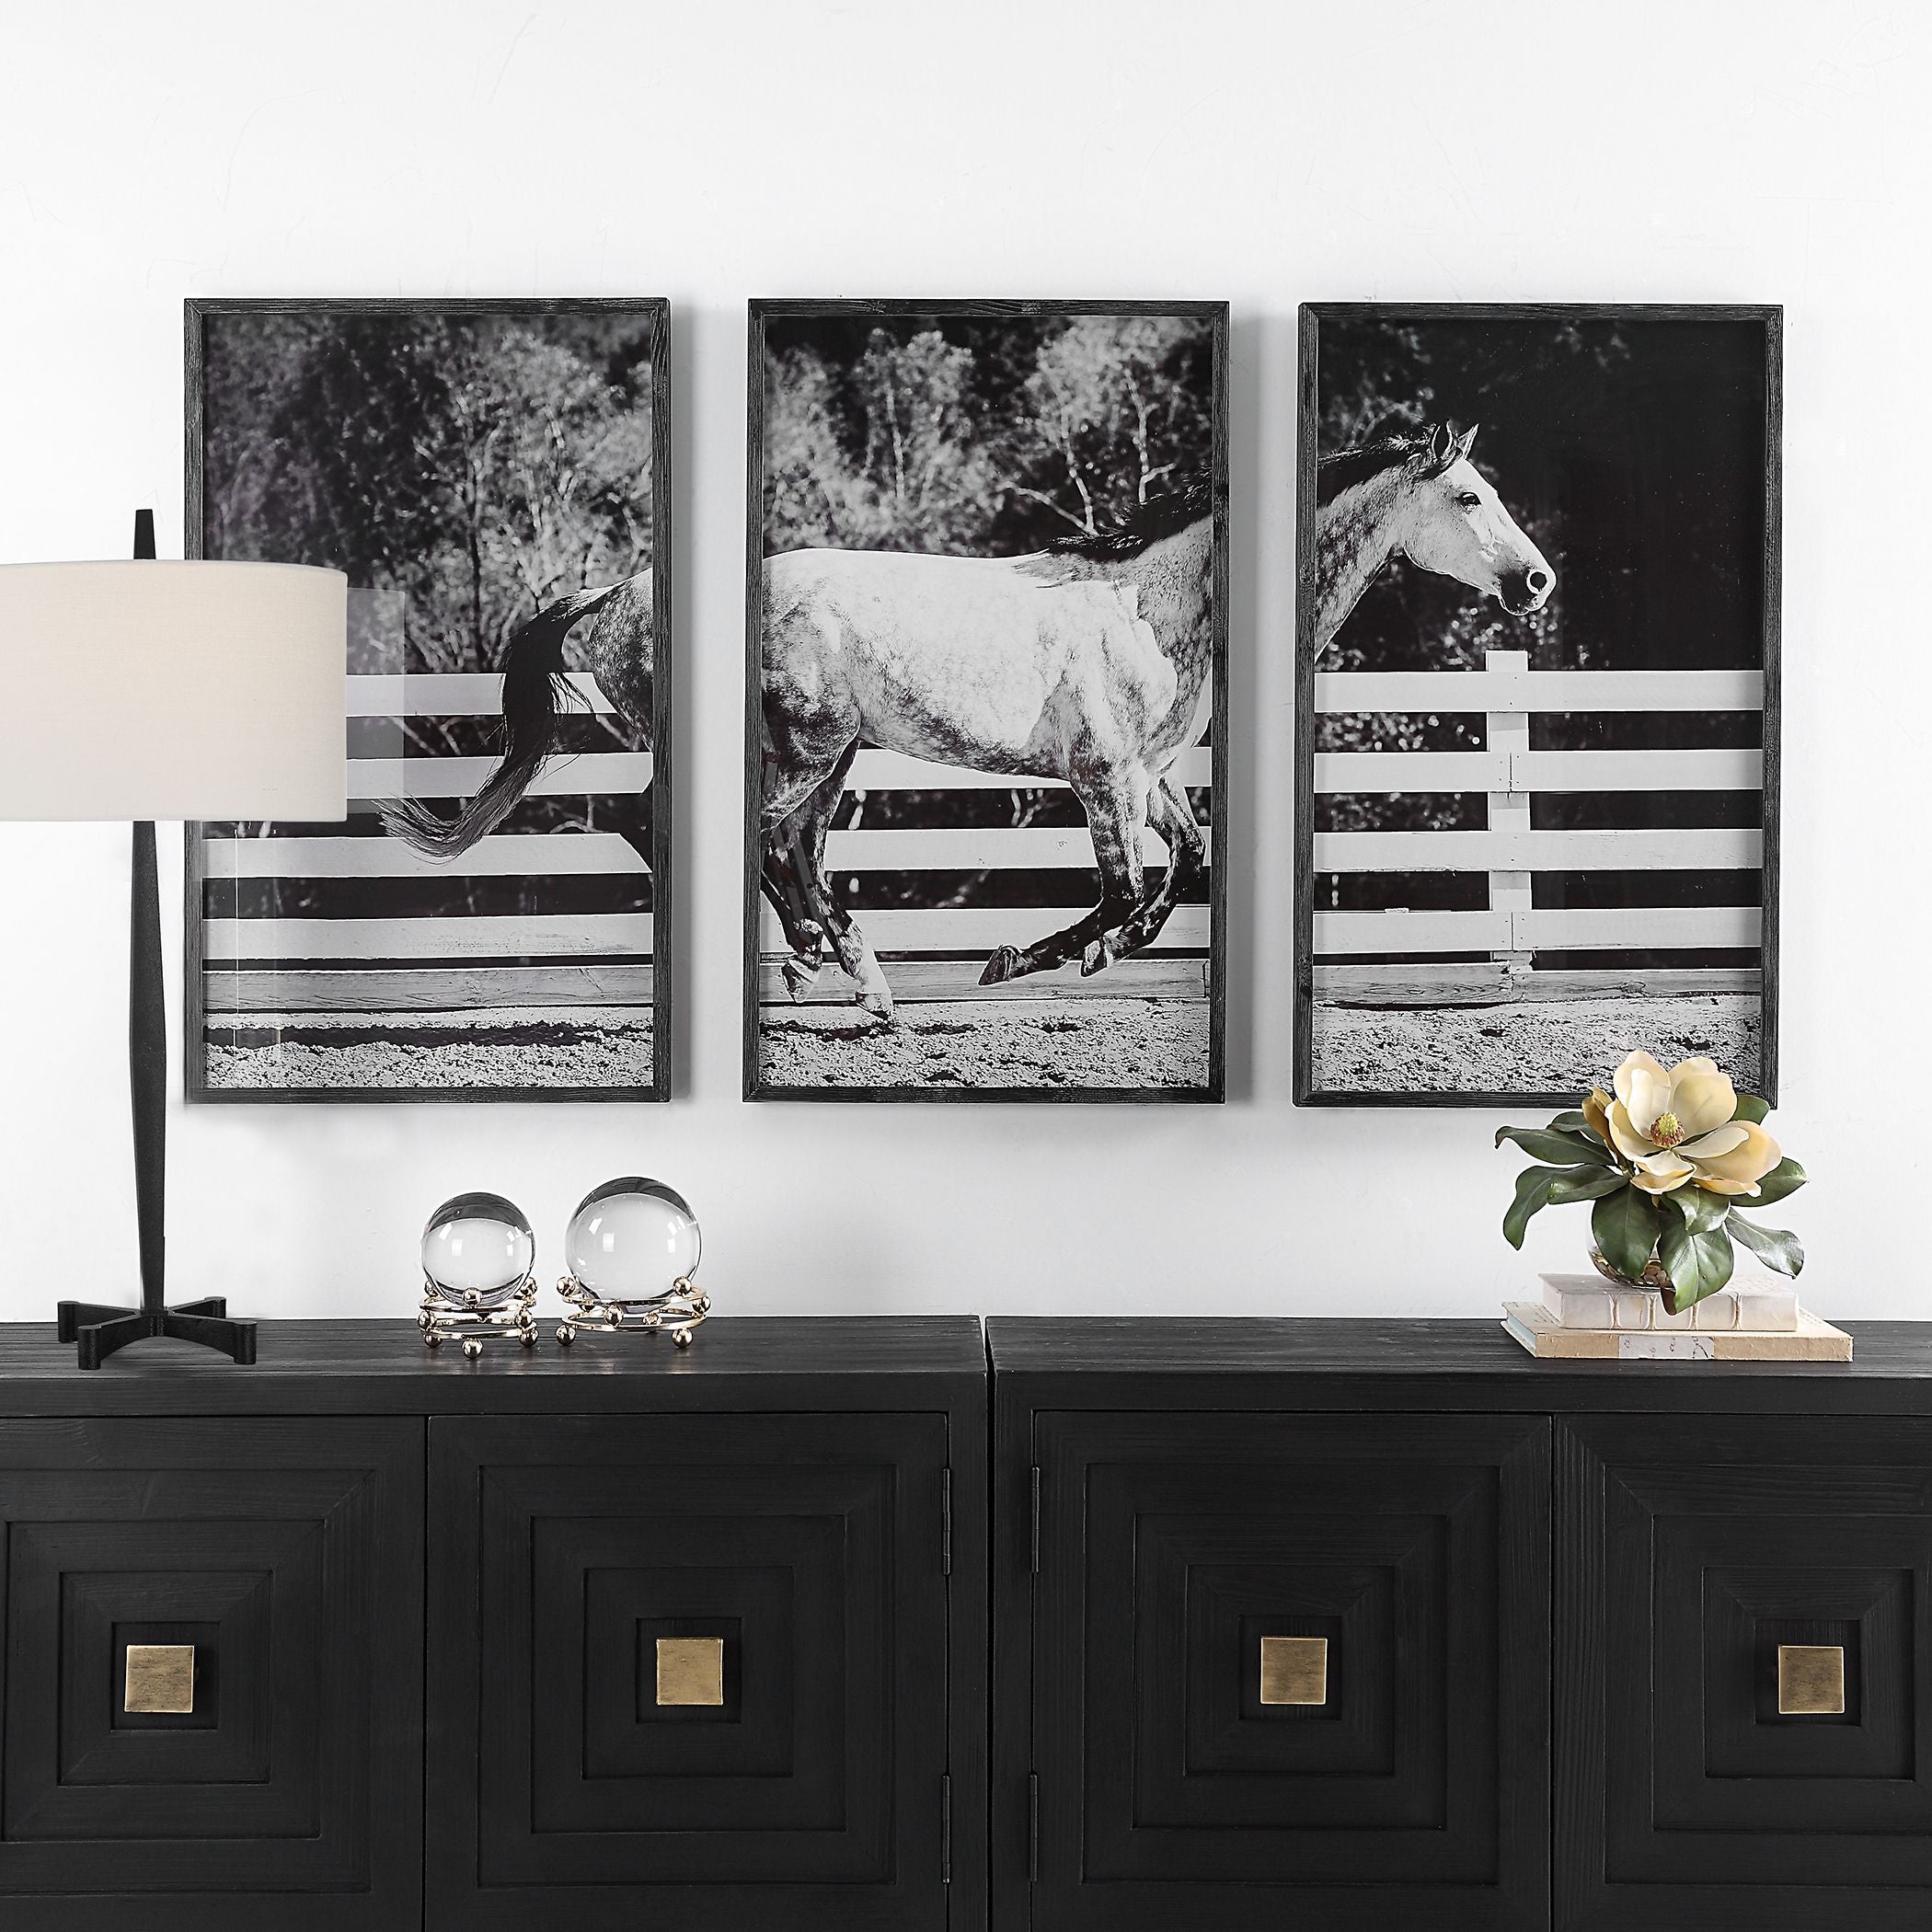 Using Art to Create a Statement in your Beautiful Home